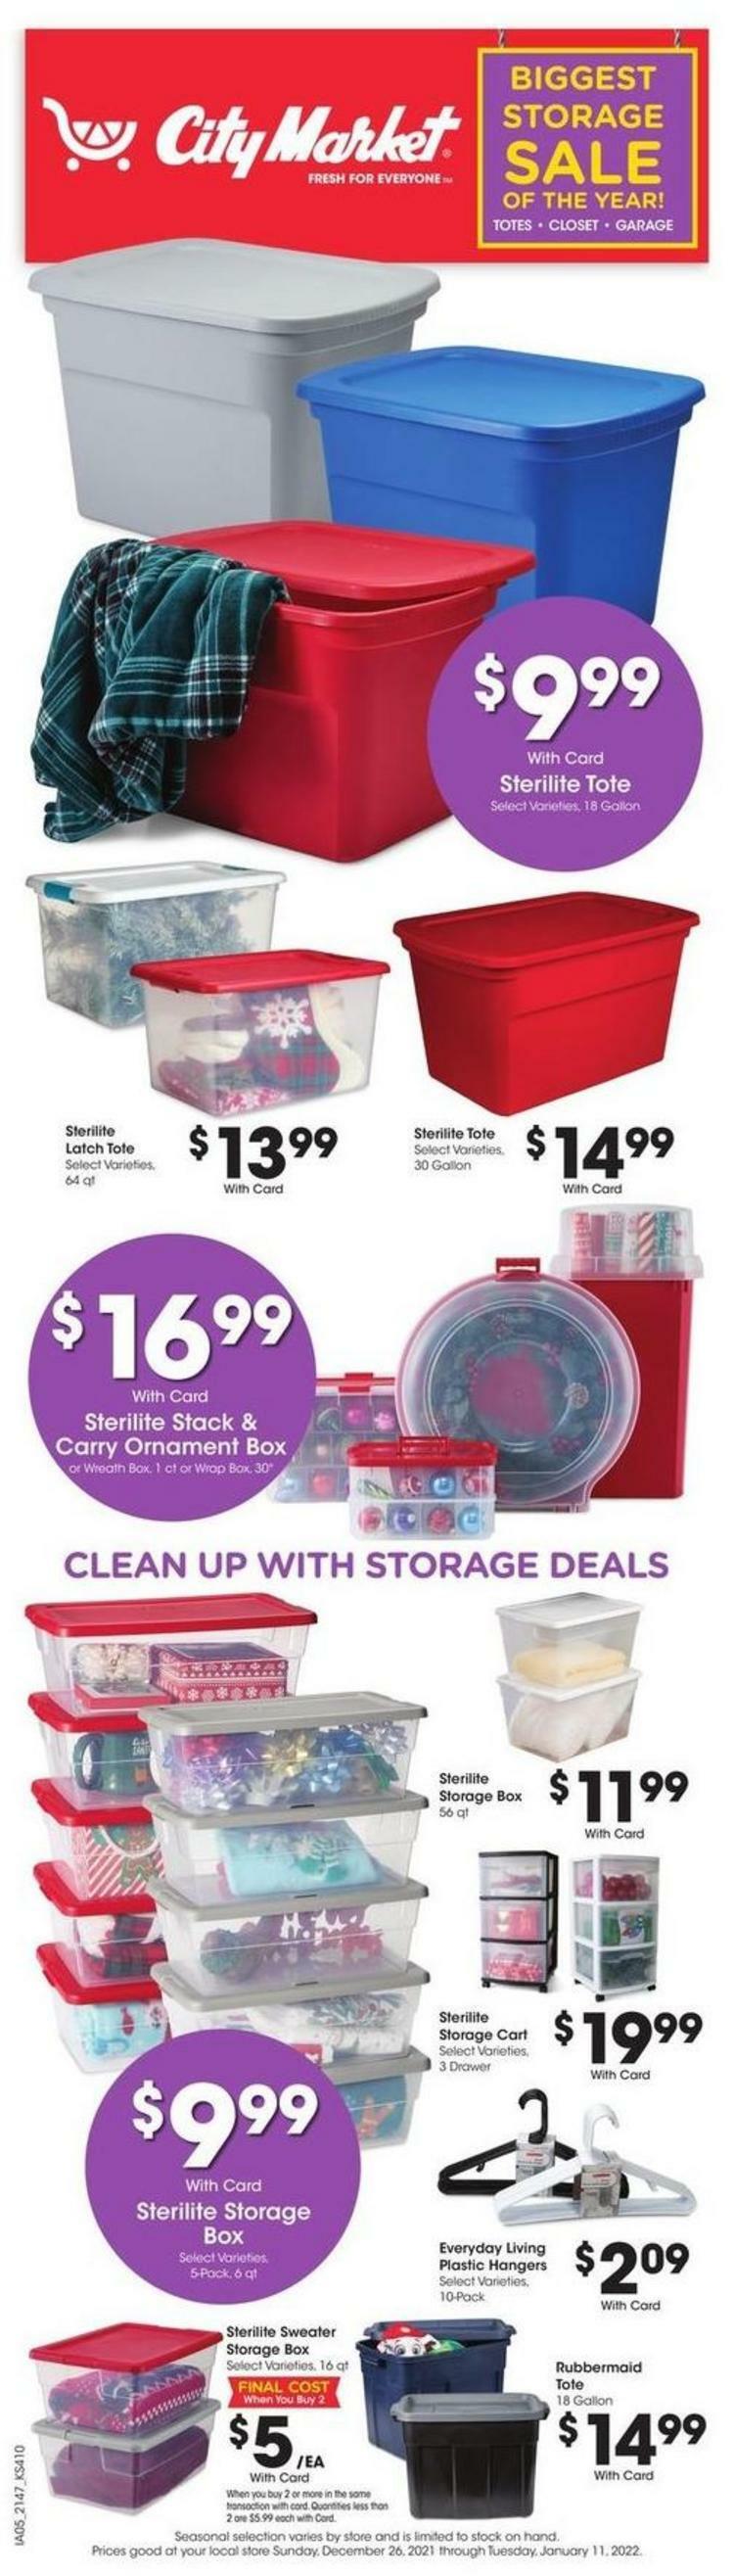 City Market Storage Sale Weekly Ad from December 26